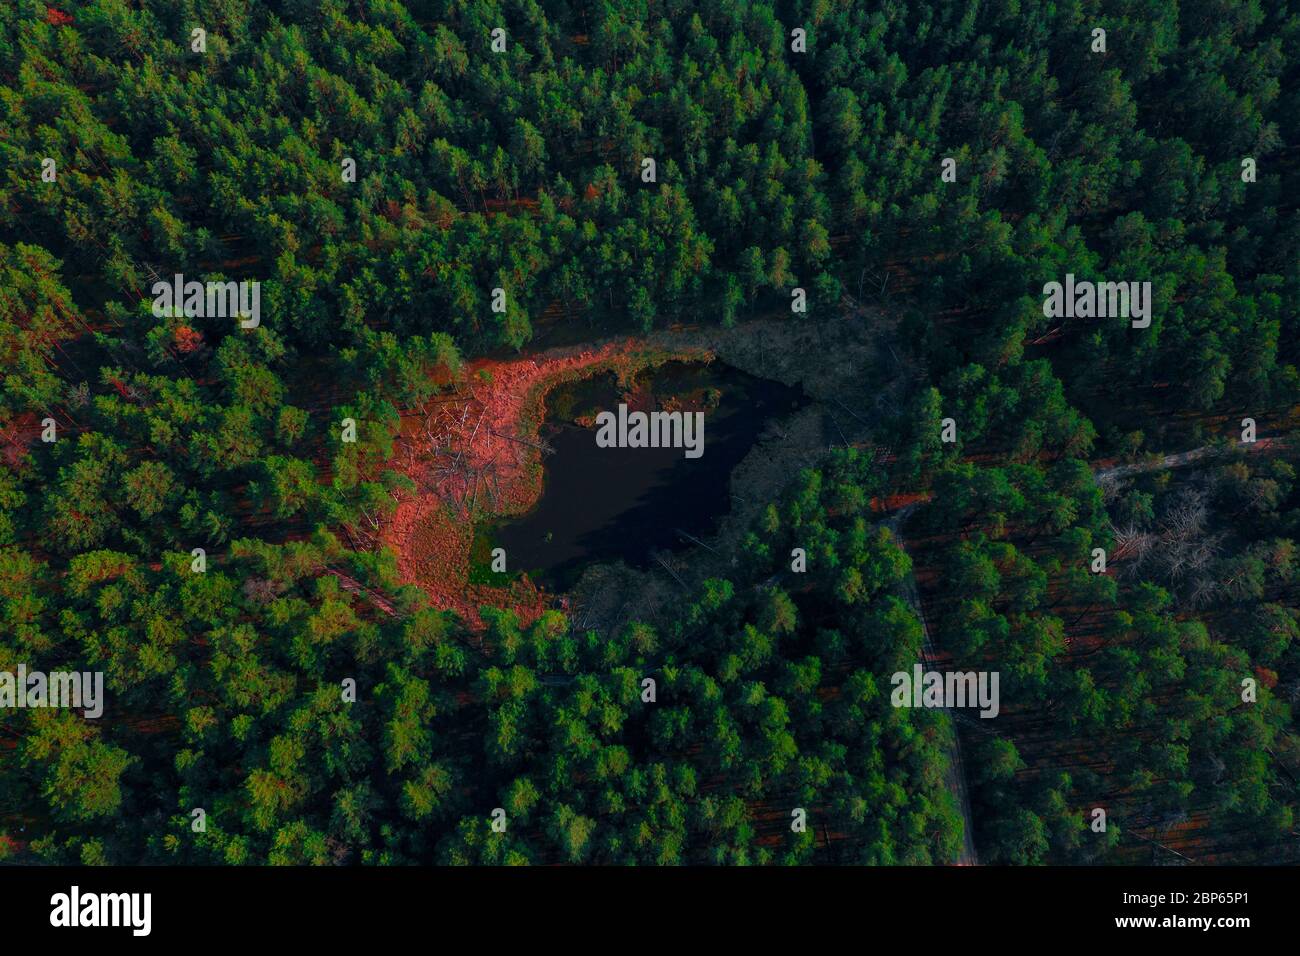 Small lake with pink acid shore in green forest shoted from drone Stock Photo